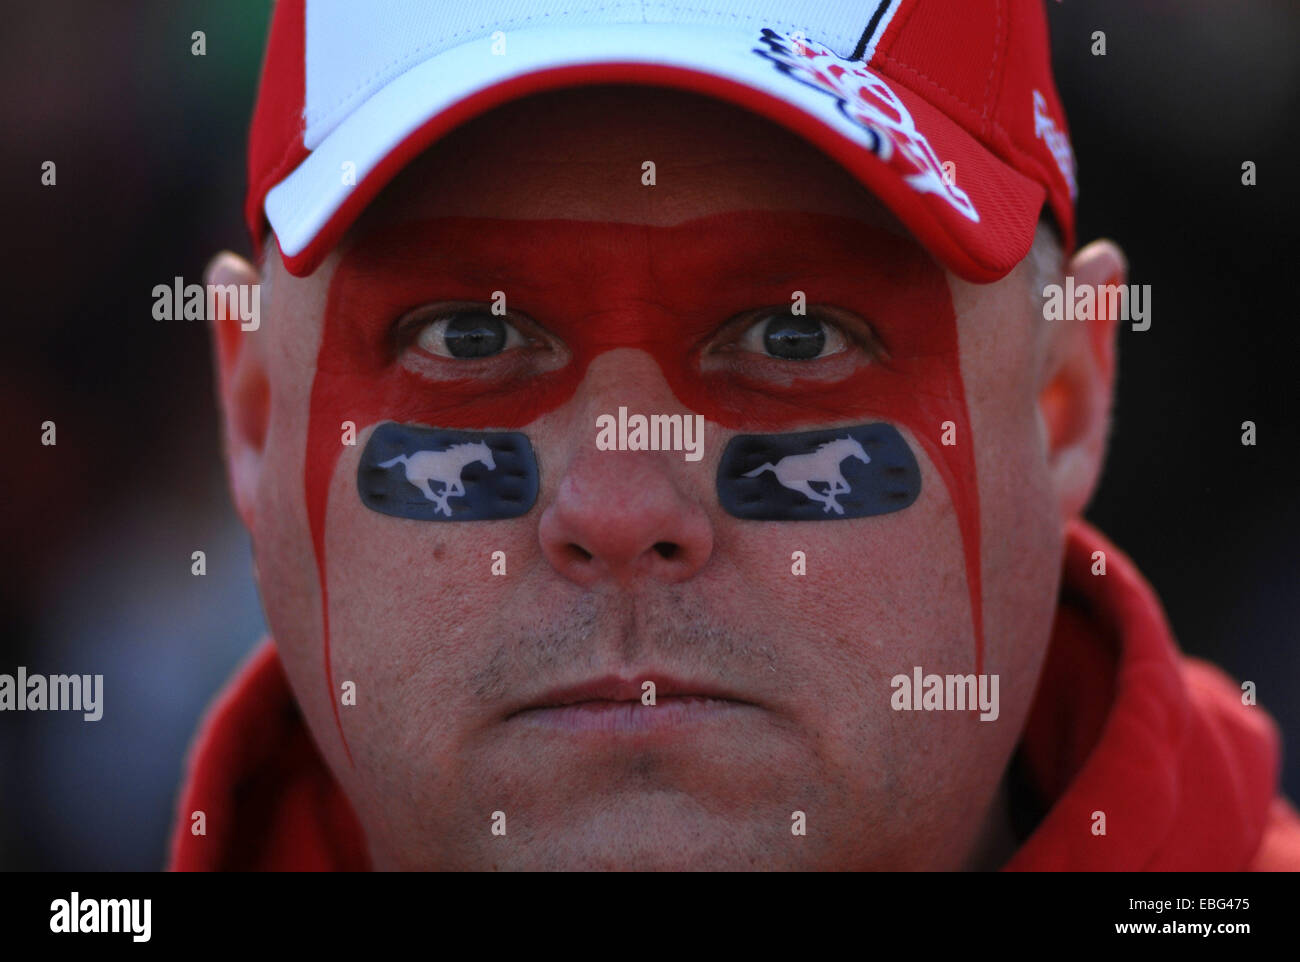 Vancouver, Canada. 30th Nov, 2014. A football fan poses during CFL's 102nd Grey Cup finals in Vancouver, Canada, Nov. 30, 2014. Calgary Stampeders defeated Hamilton Tiger-Cats and captured 102nd Grey Cup. © Sergei Bachlakov/Xinhua/Alamy Live News Stock Photo